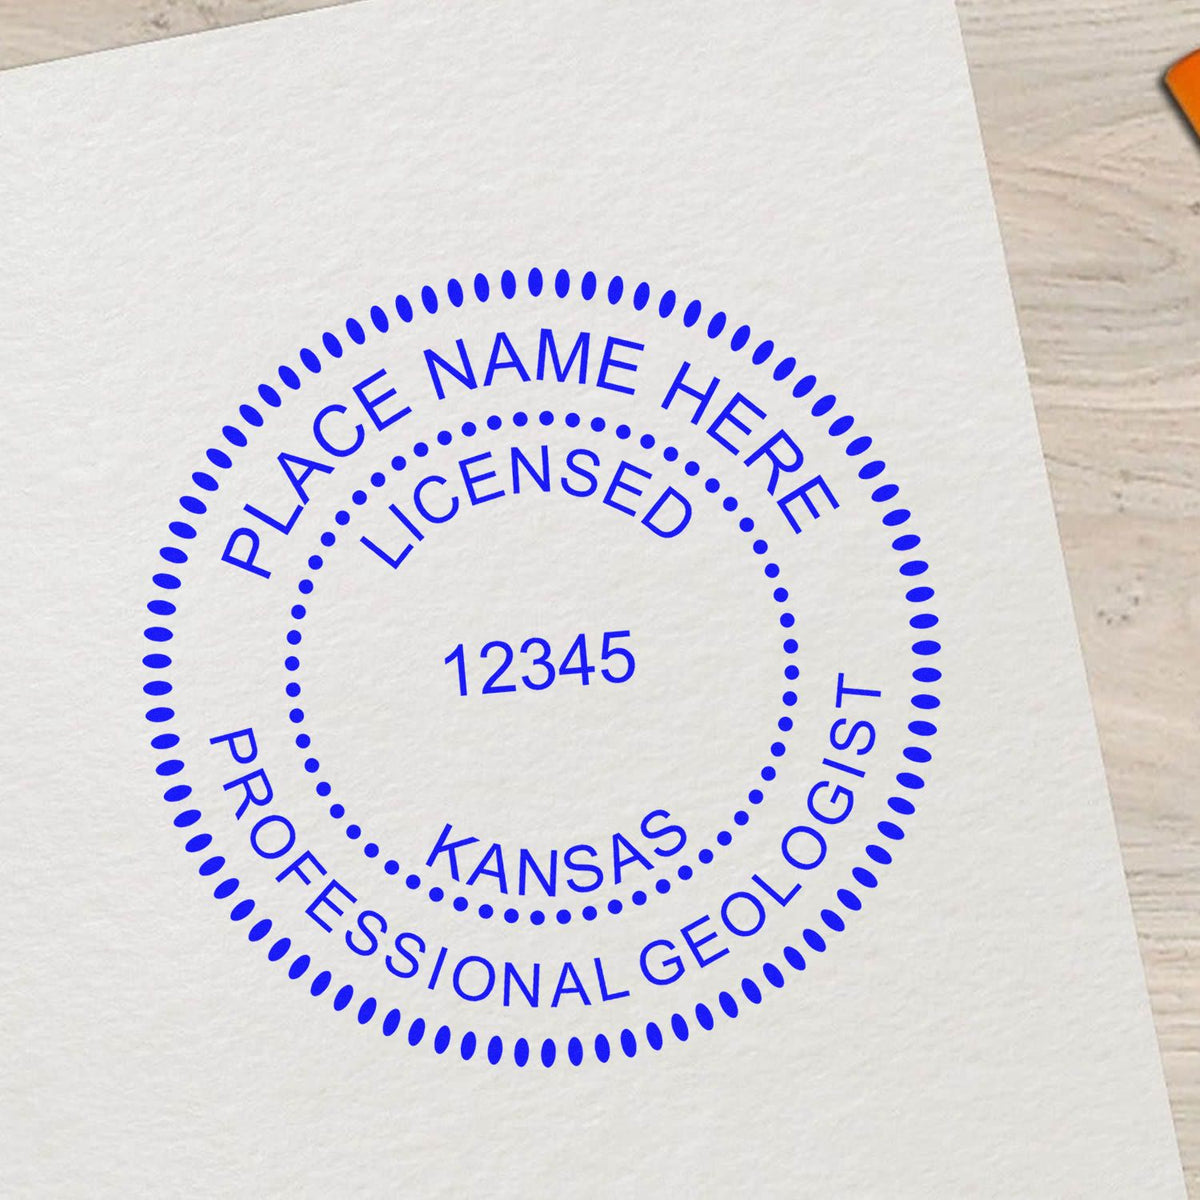 An alternative view of the Kansas Professional Geologist Seal Stamp stamped on a sheet of paper showing the image in use